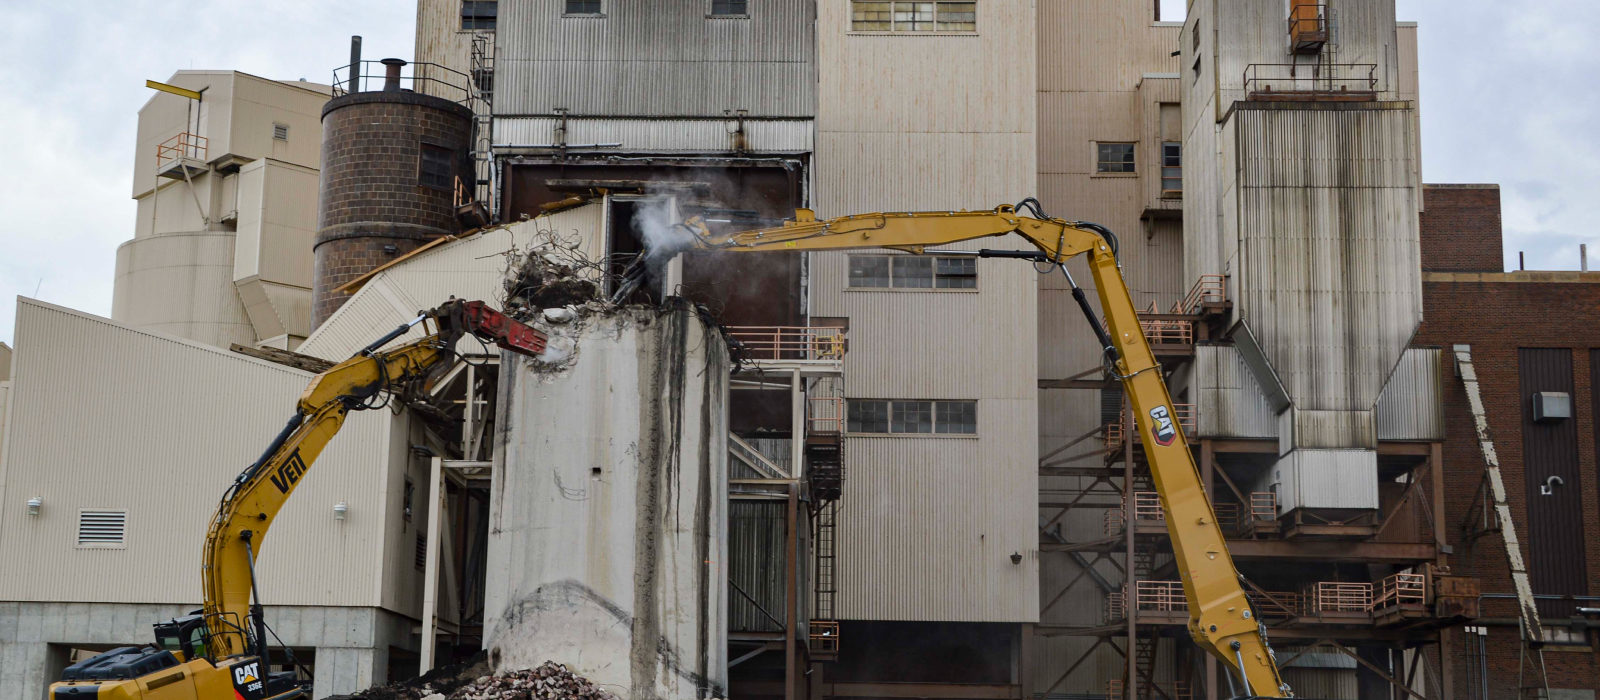 Two Excavators in Action at The Silve Lake Site Demolition